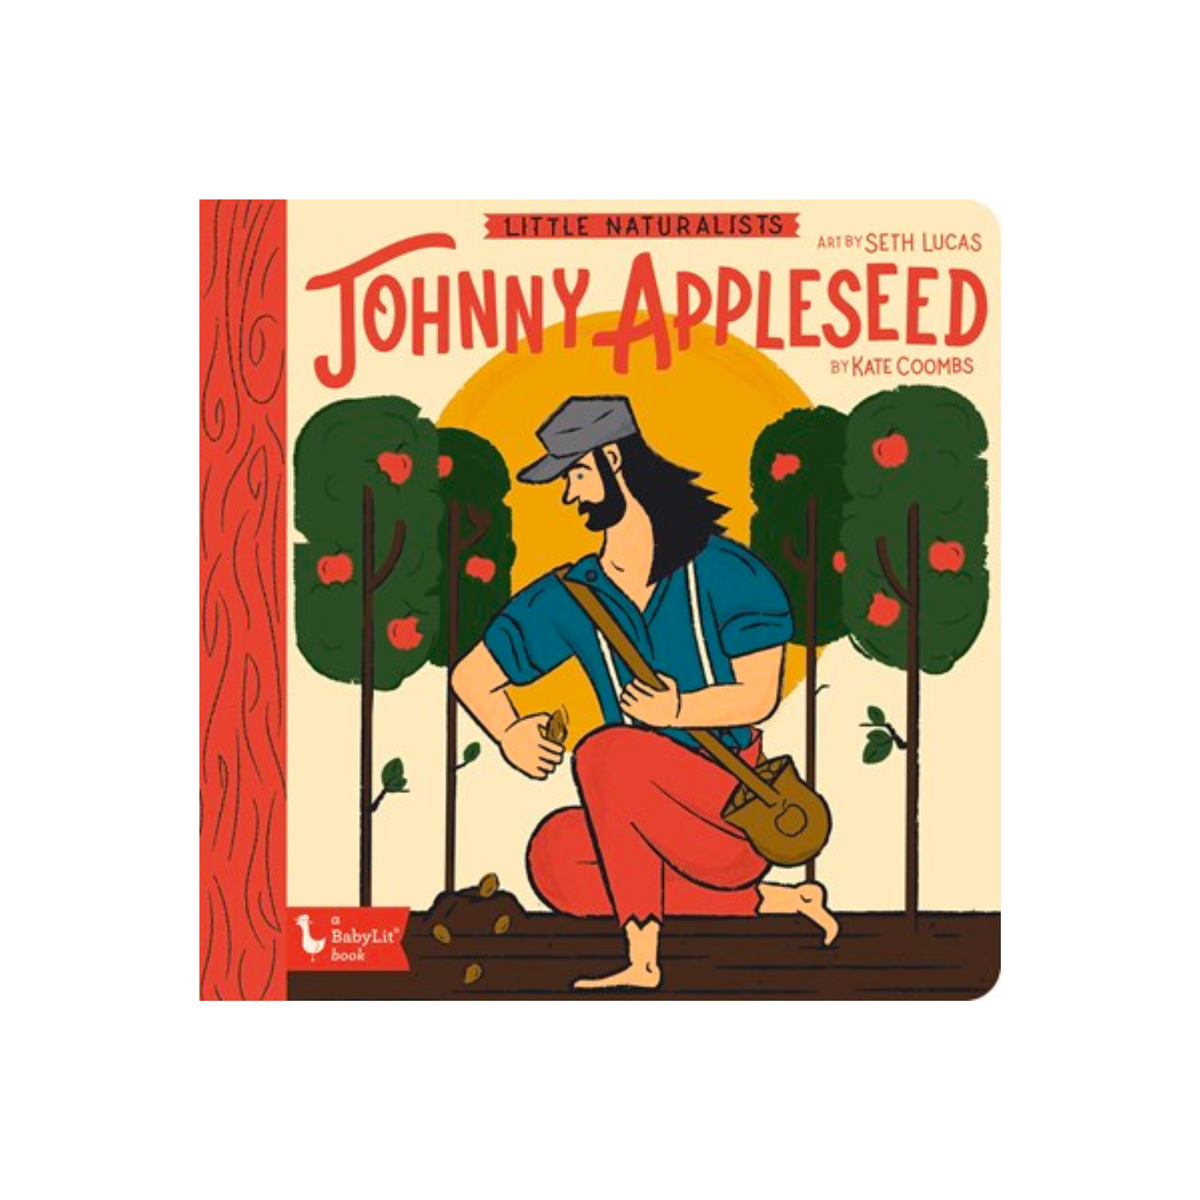 Little Naturalists: Johnny Appleseed Book